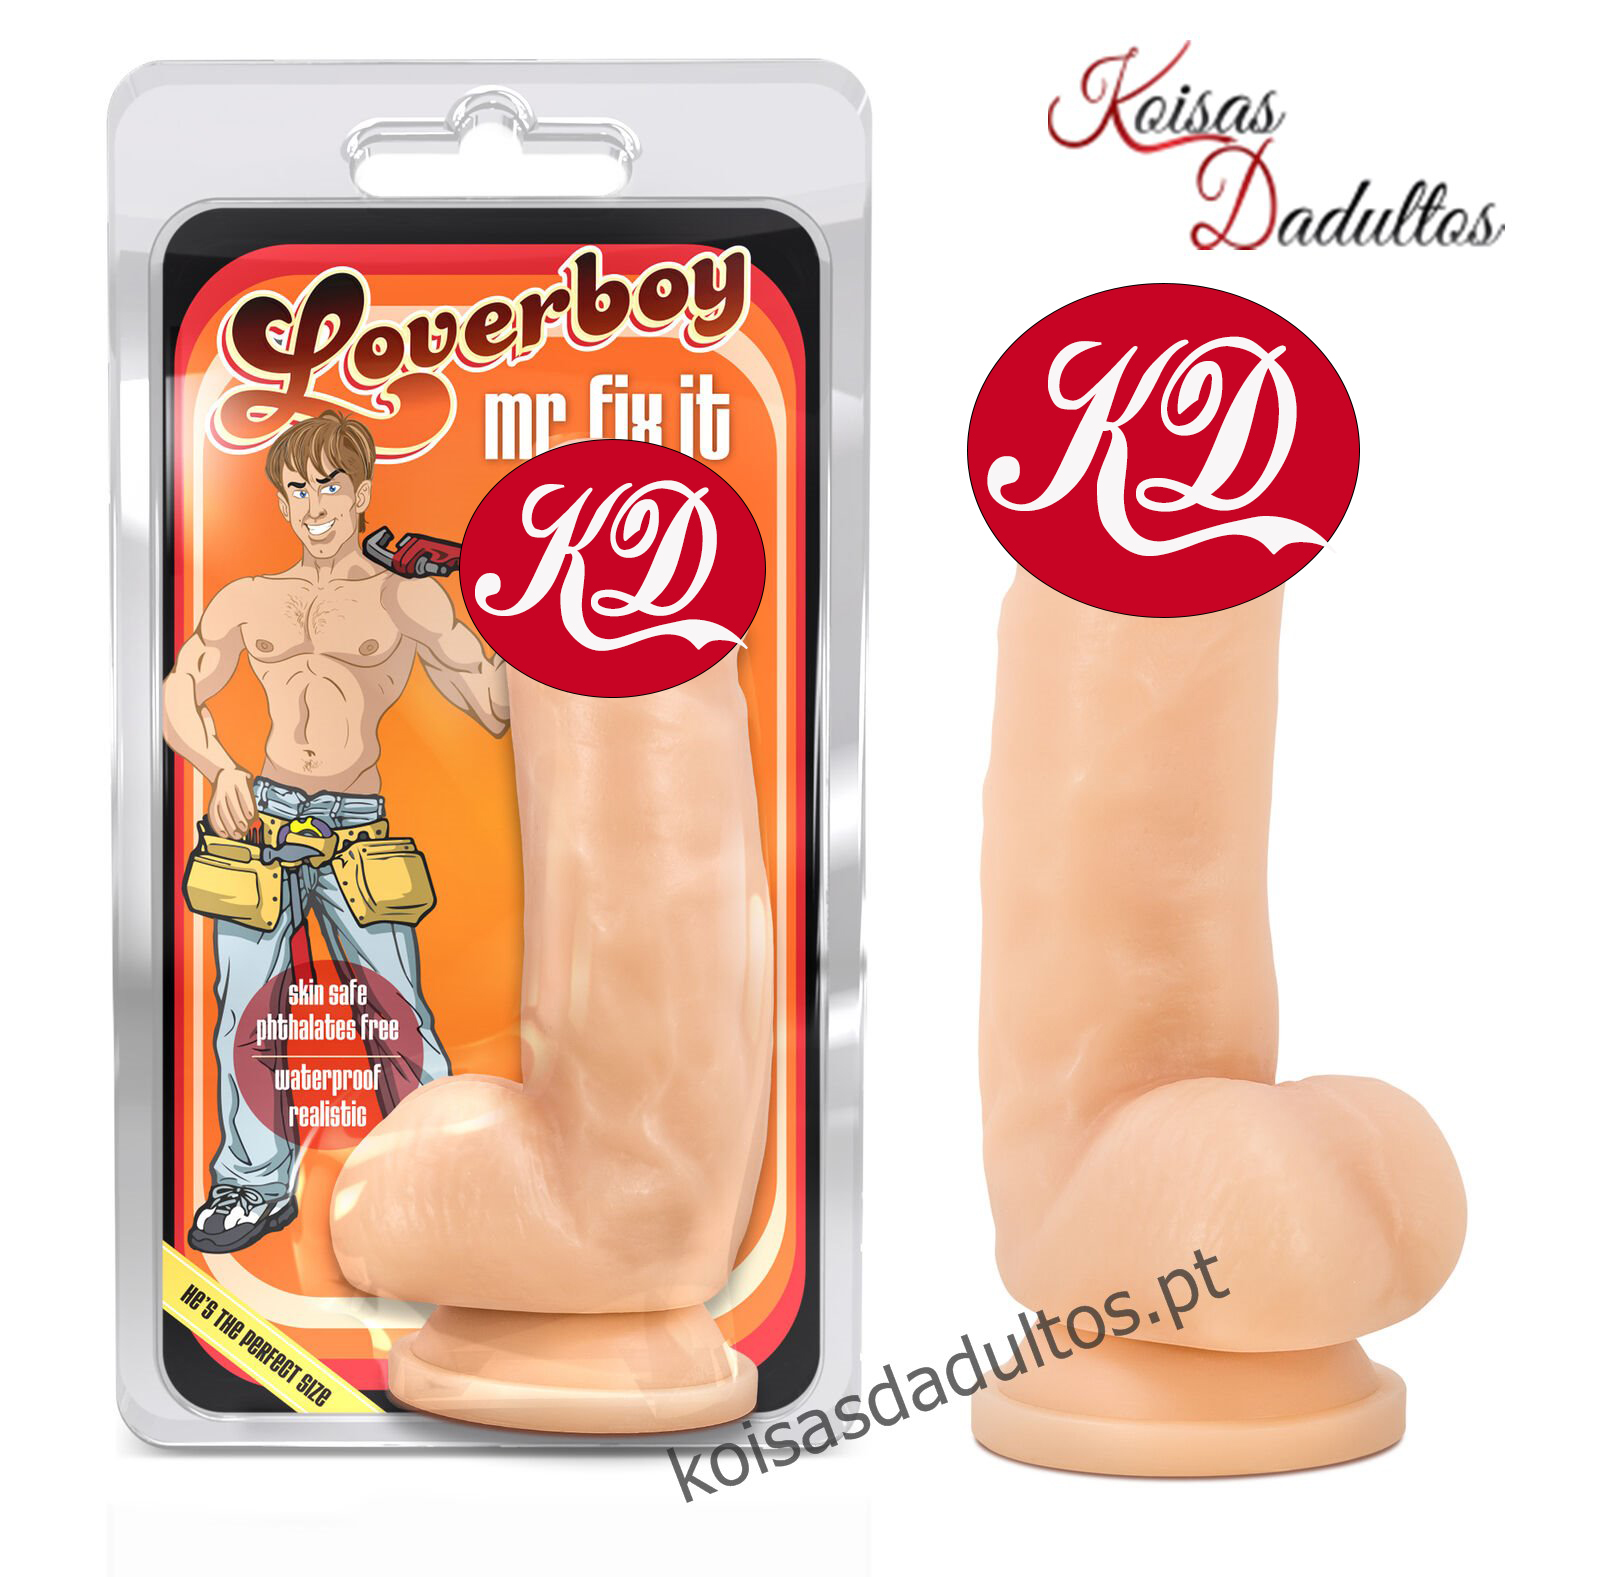 DONGS DILDOS Loverboy Mr. Fix It